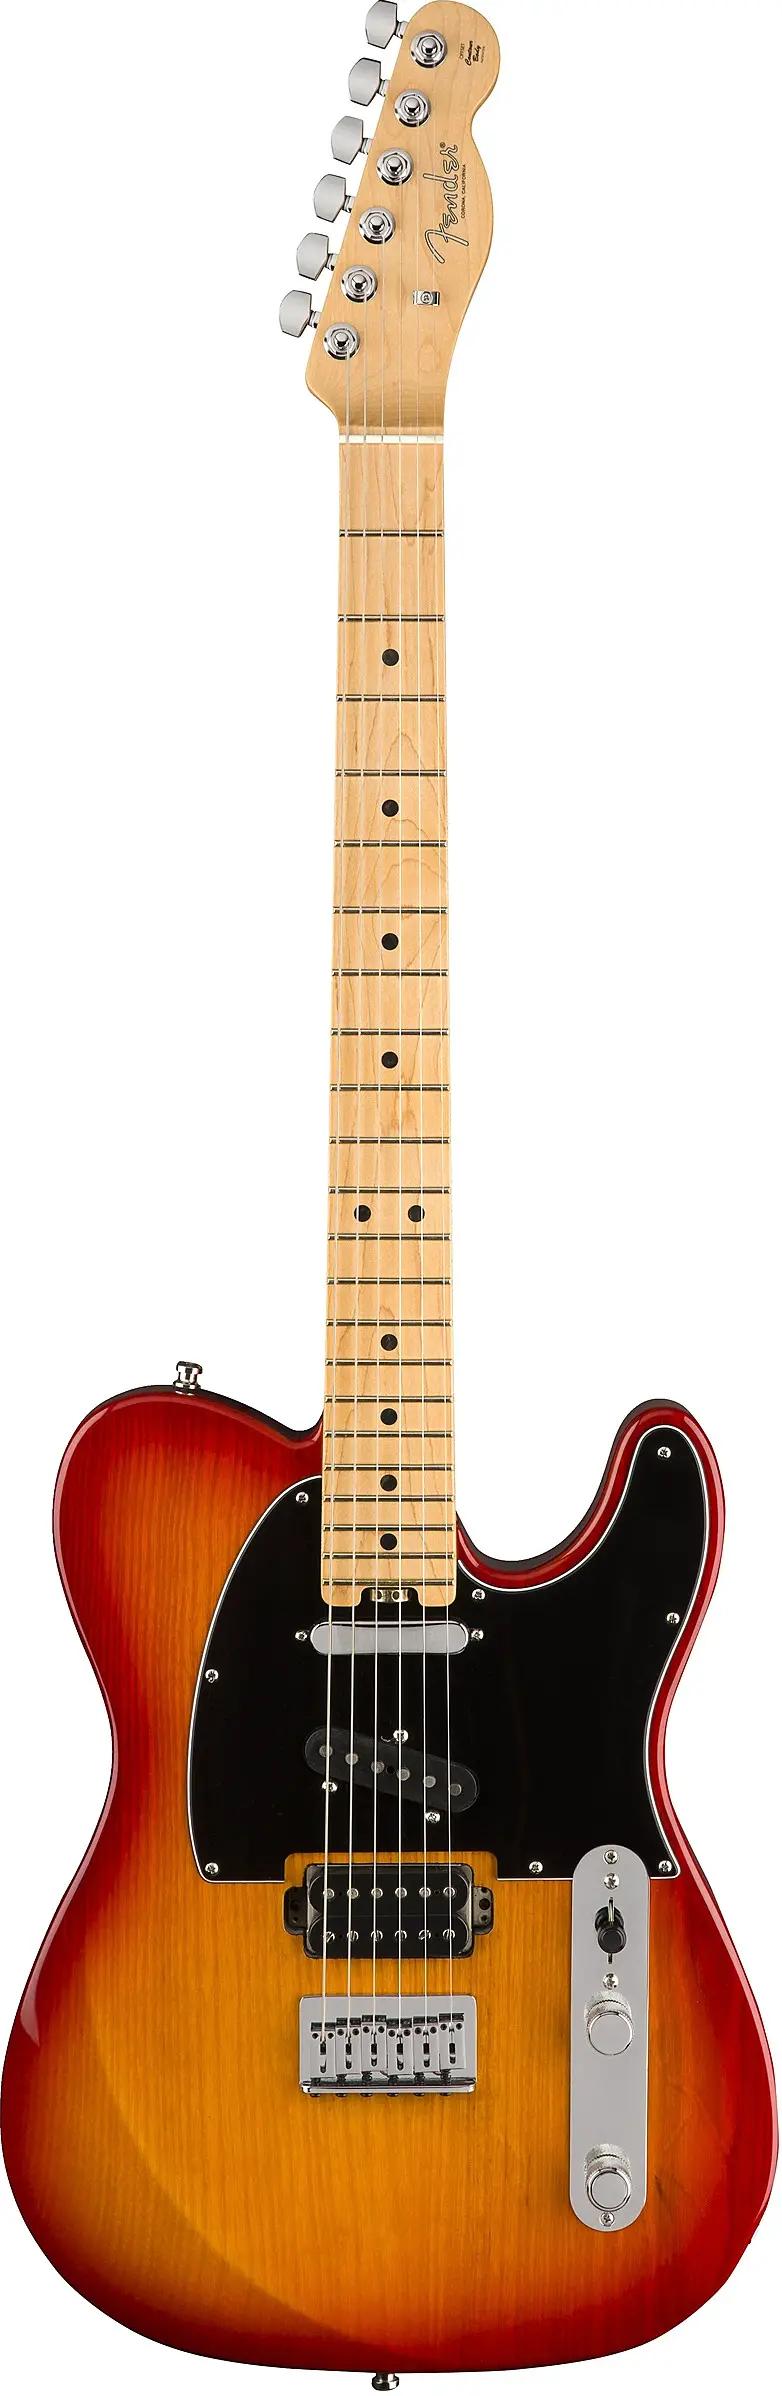 2018 Limited Edition American Elite Telecaster HSS by Fender